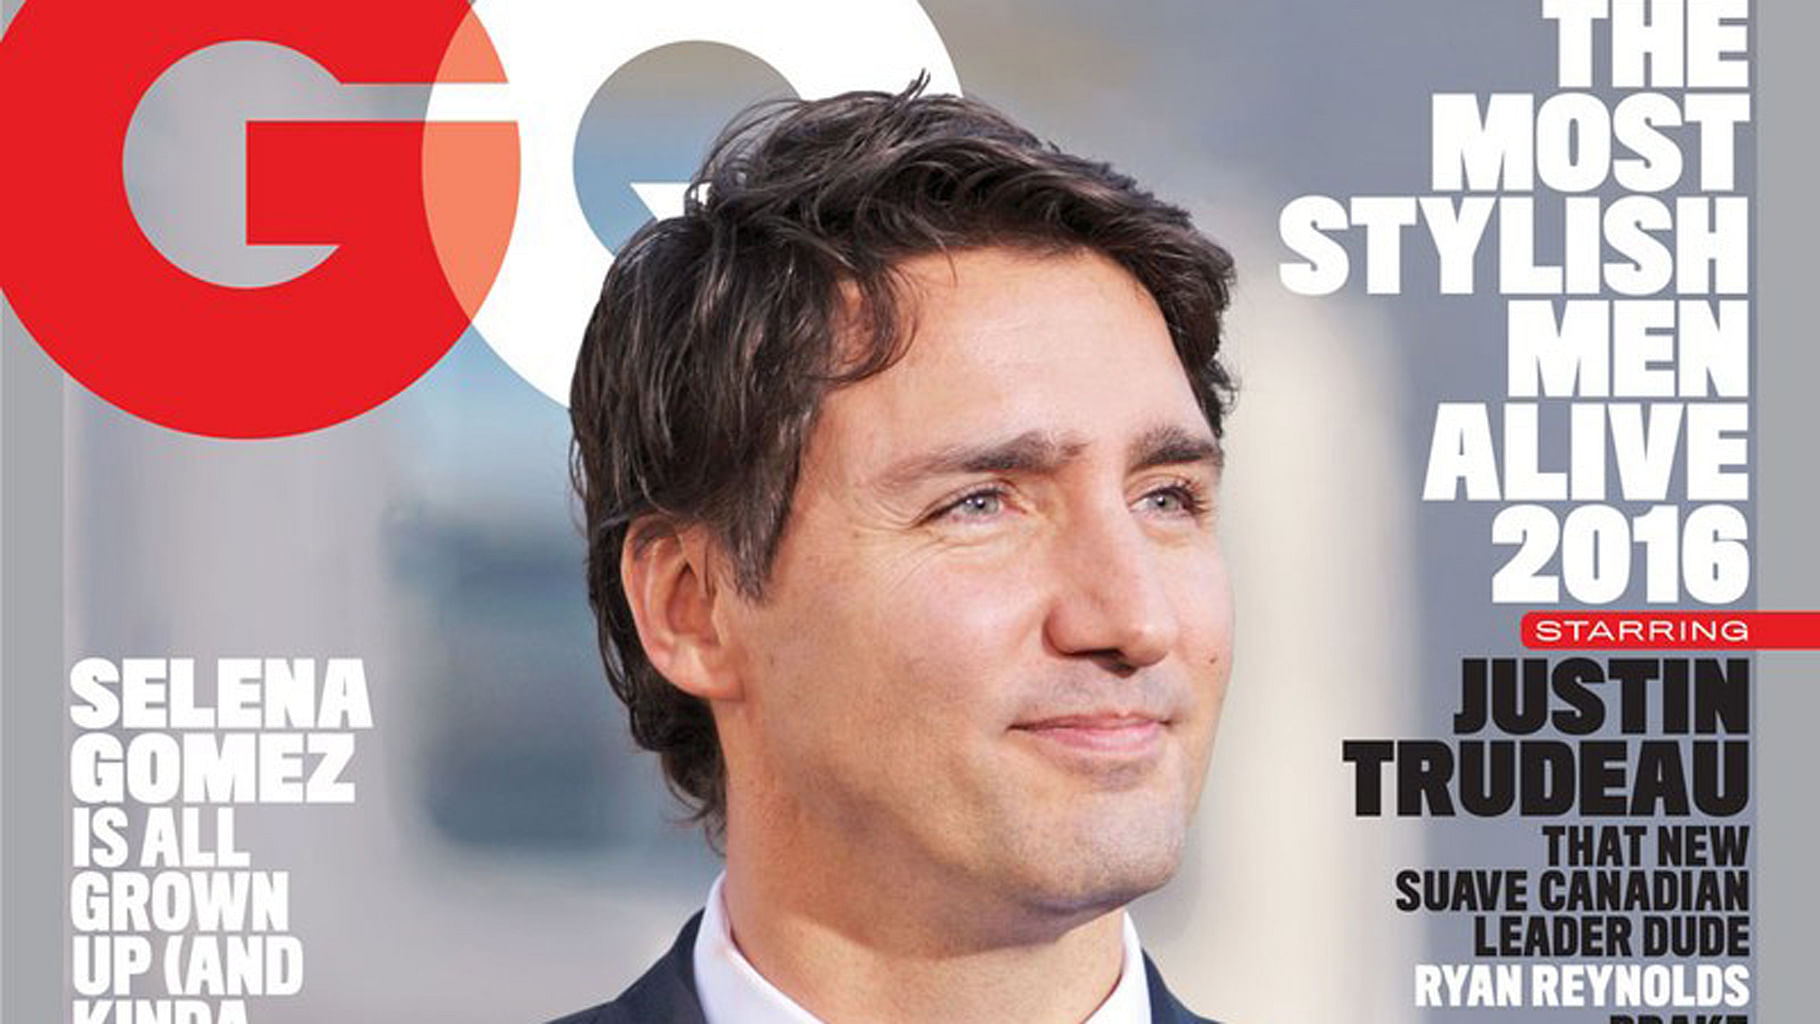 Canadian Prime Minister Justin Trudeau regularly makes news for his feminism, wit and charm. (Photo: <a href="http://www.gq.com/story/justin-trudeau-gq-cover-most-stylish-men-alive">GQ</a>)